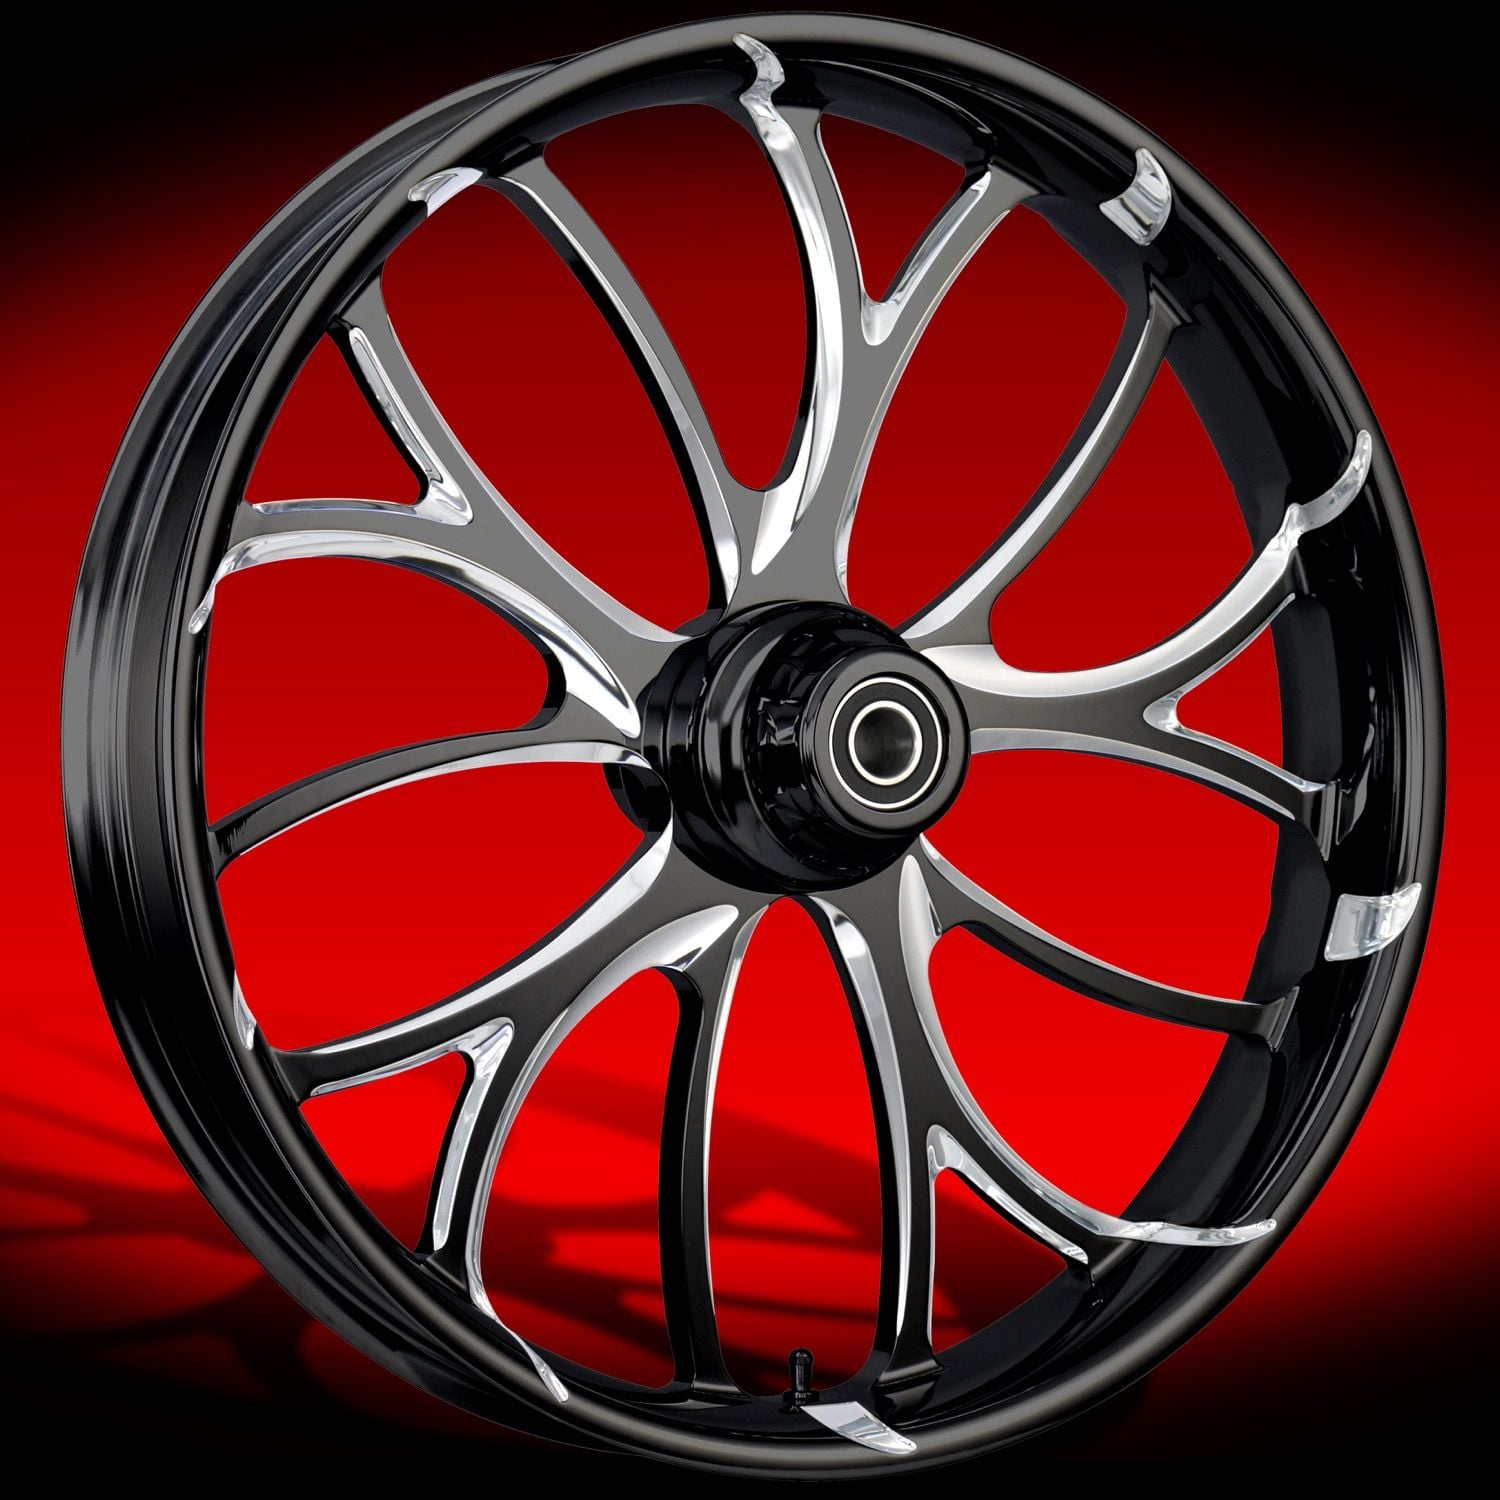 Wheels IN STOCK GET THEM QUICK!! 21 x 3.5"s !!! - Harley Davidson Forums